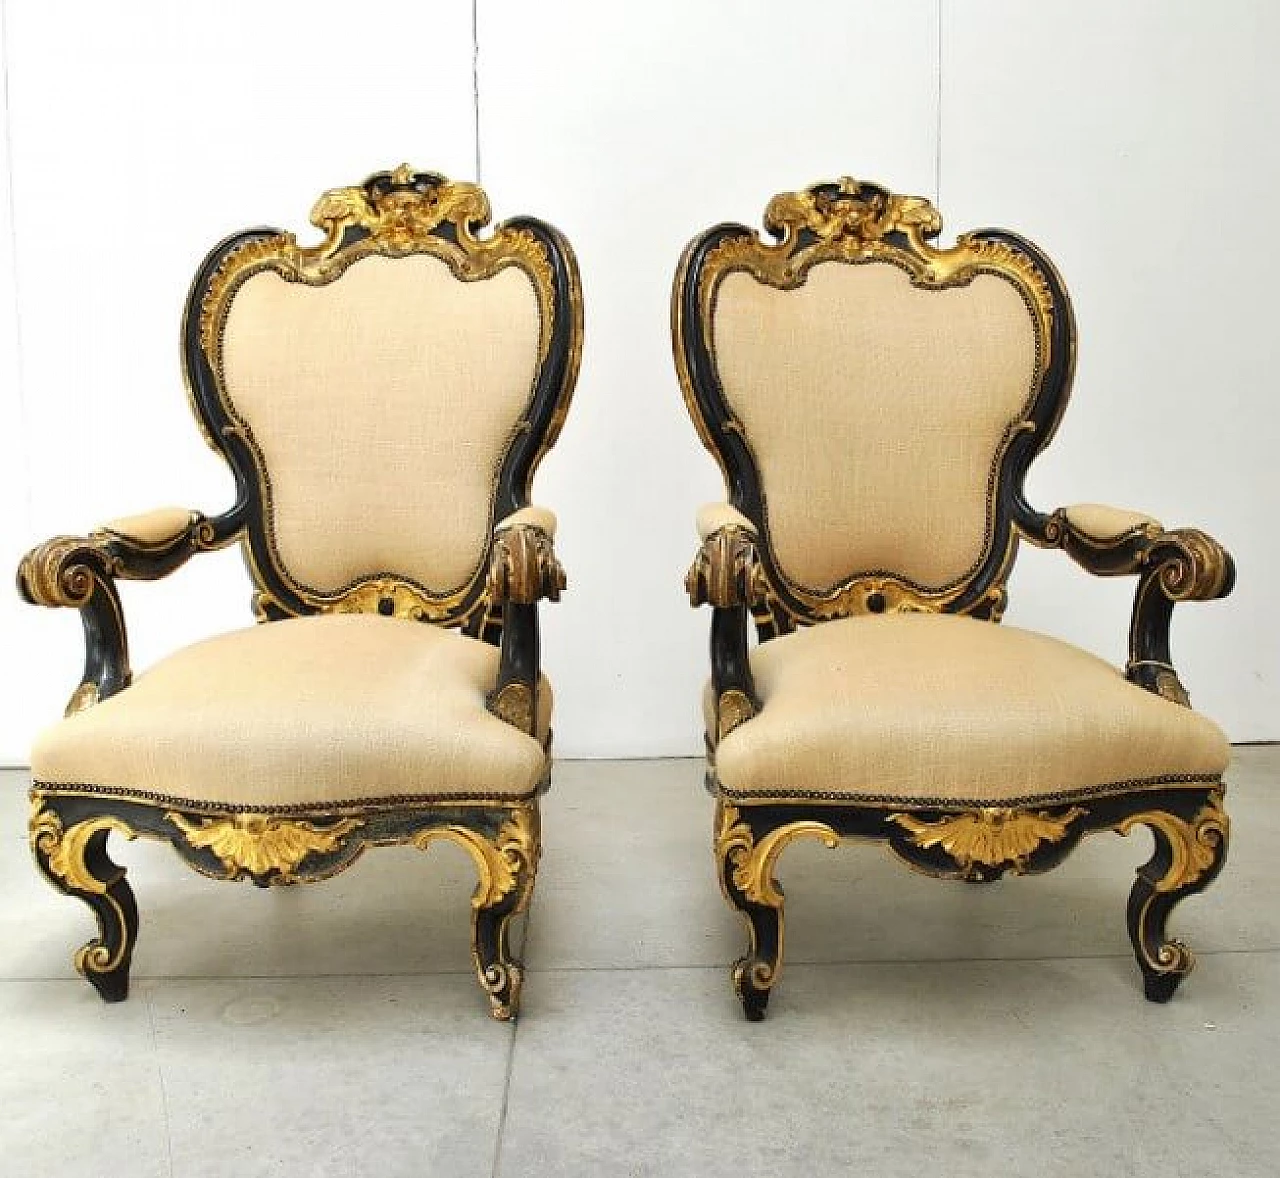 Pair of armchairs and footstool in wood and fabric, 19th century 1221264